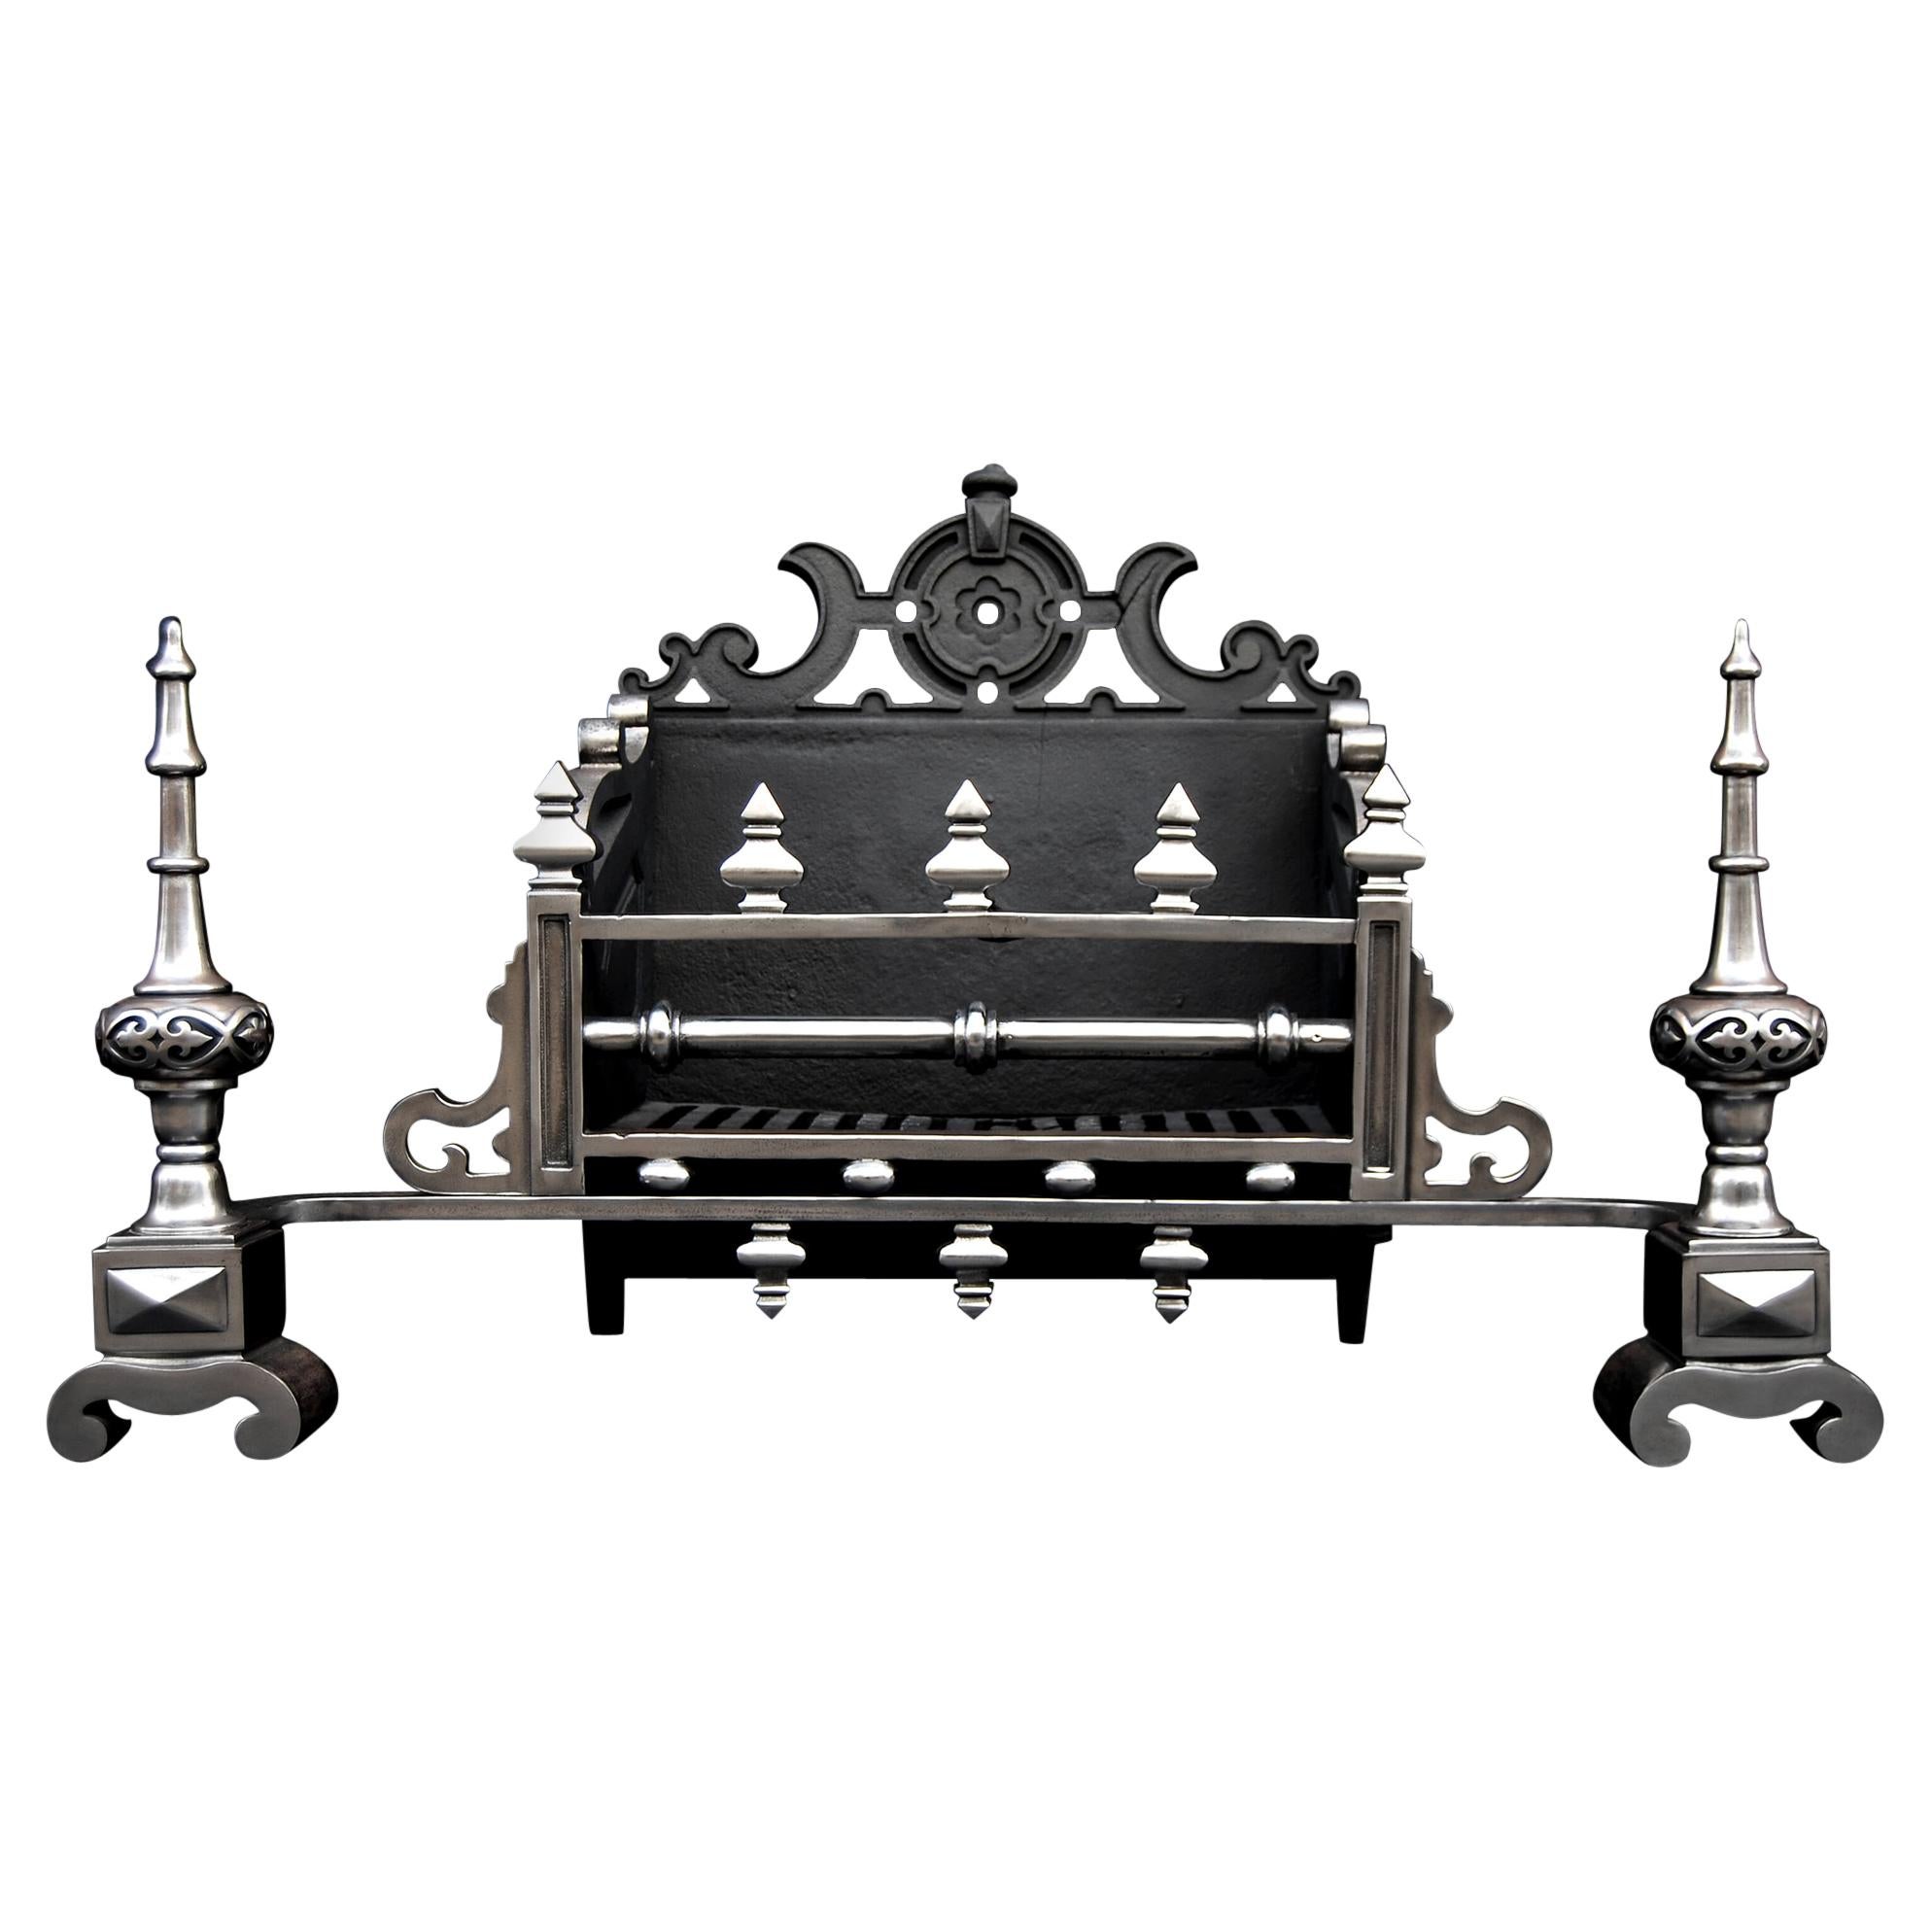 Large & Impressive Mid 19th Century English Cast Iron Firegrate For Sale